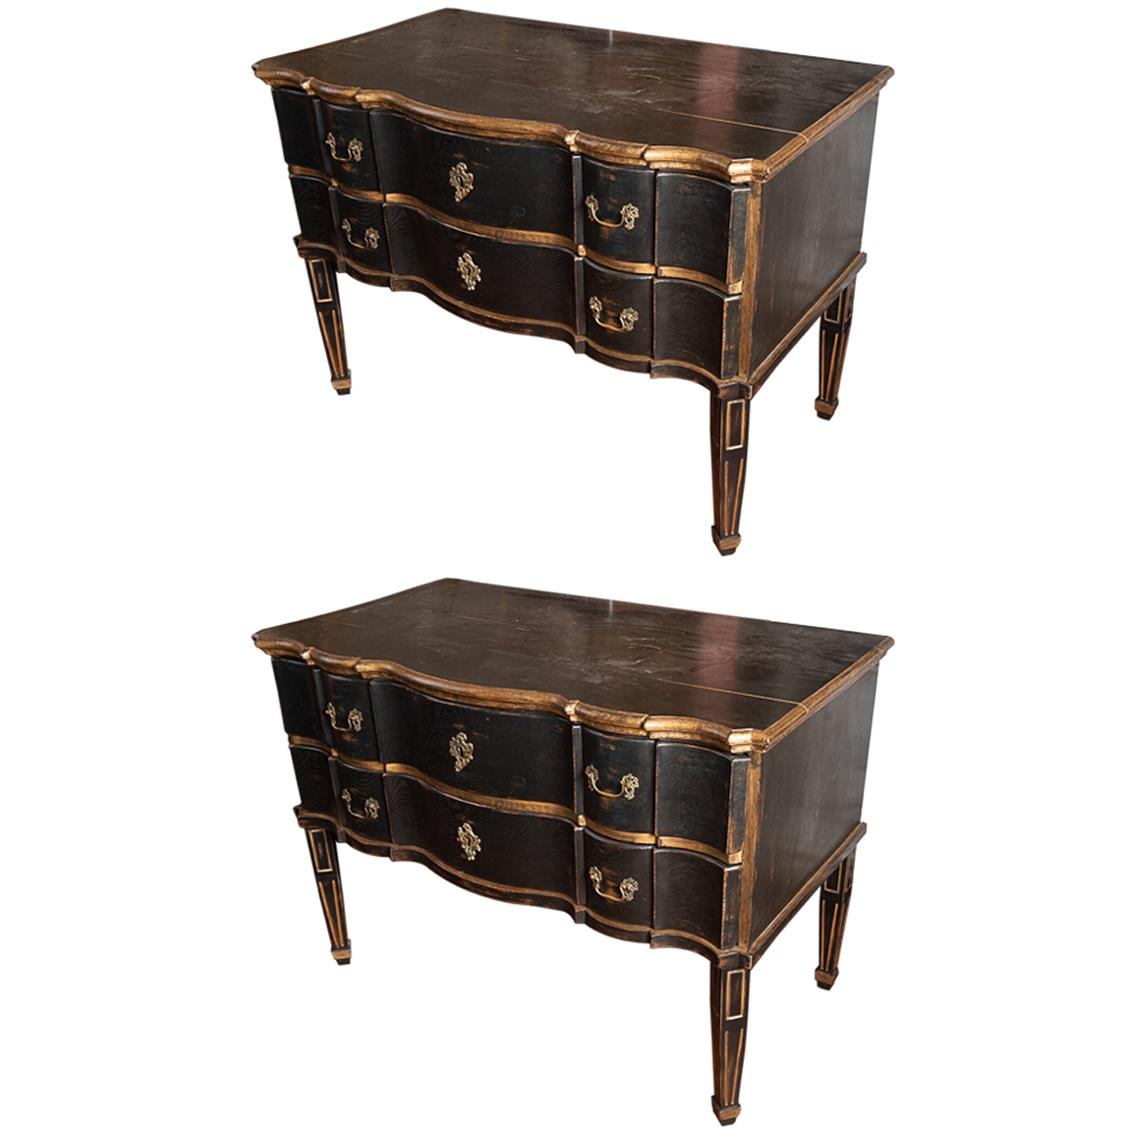 Pair of 19thc Painted and Gilded Commodes